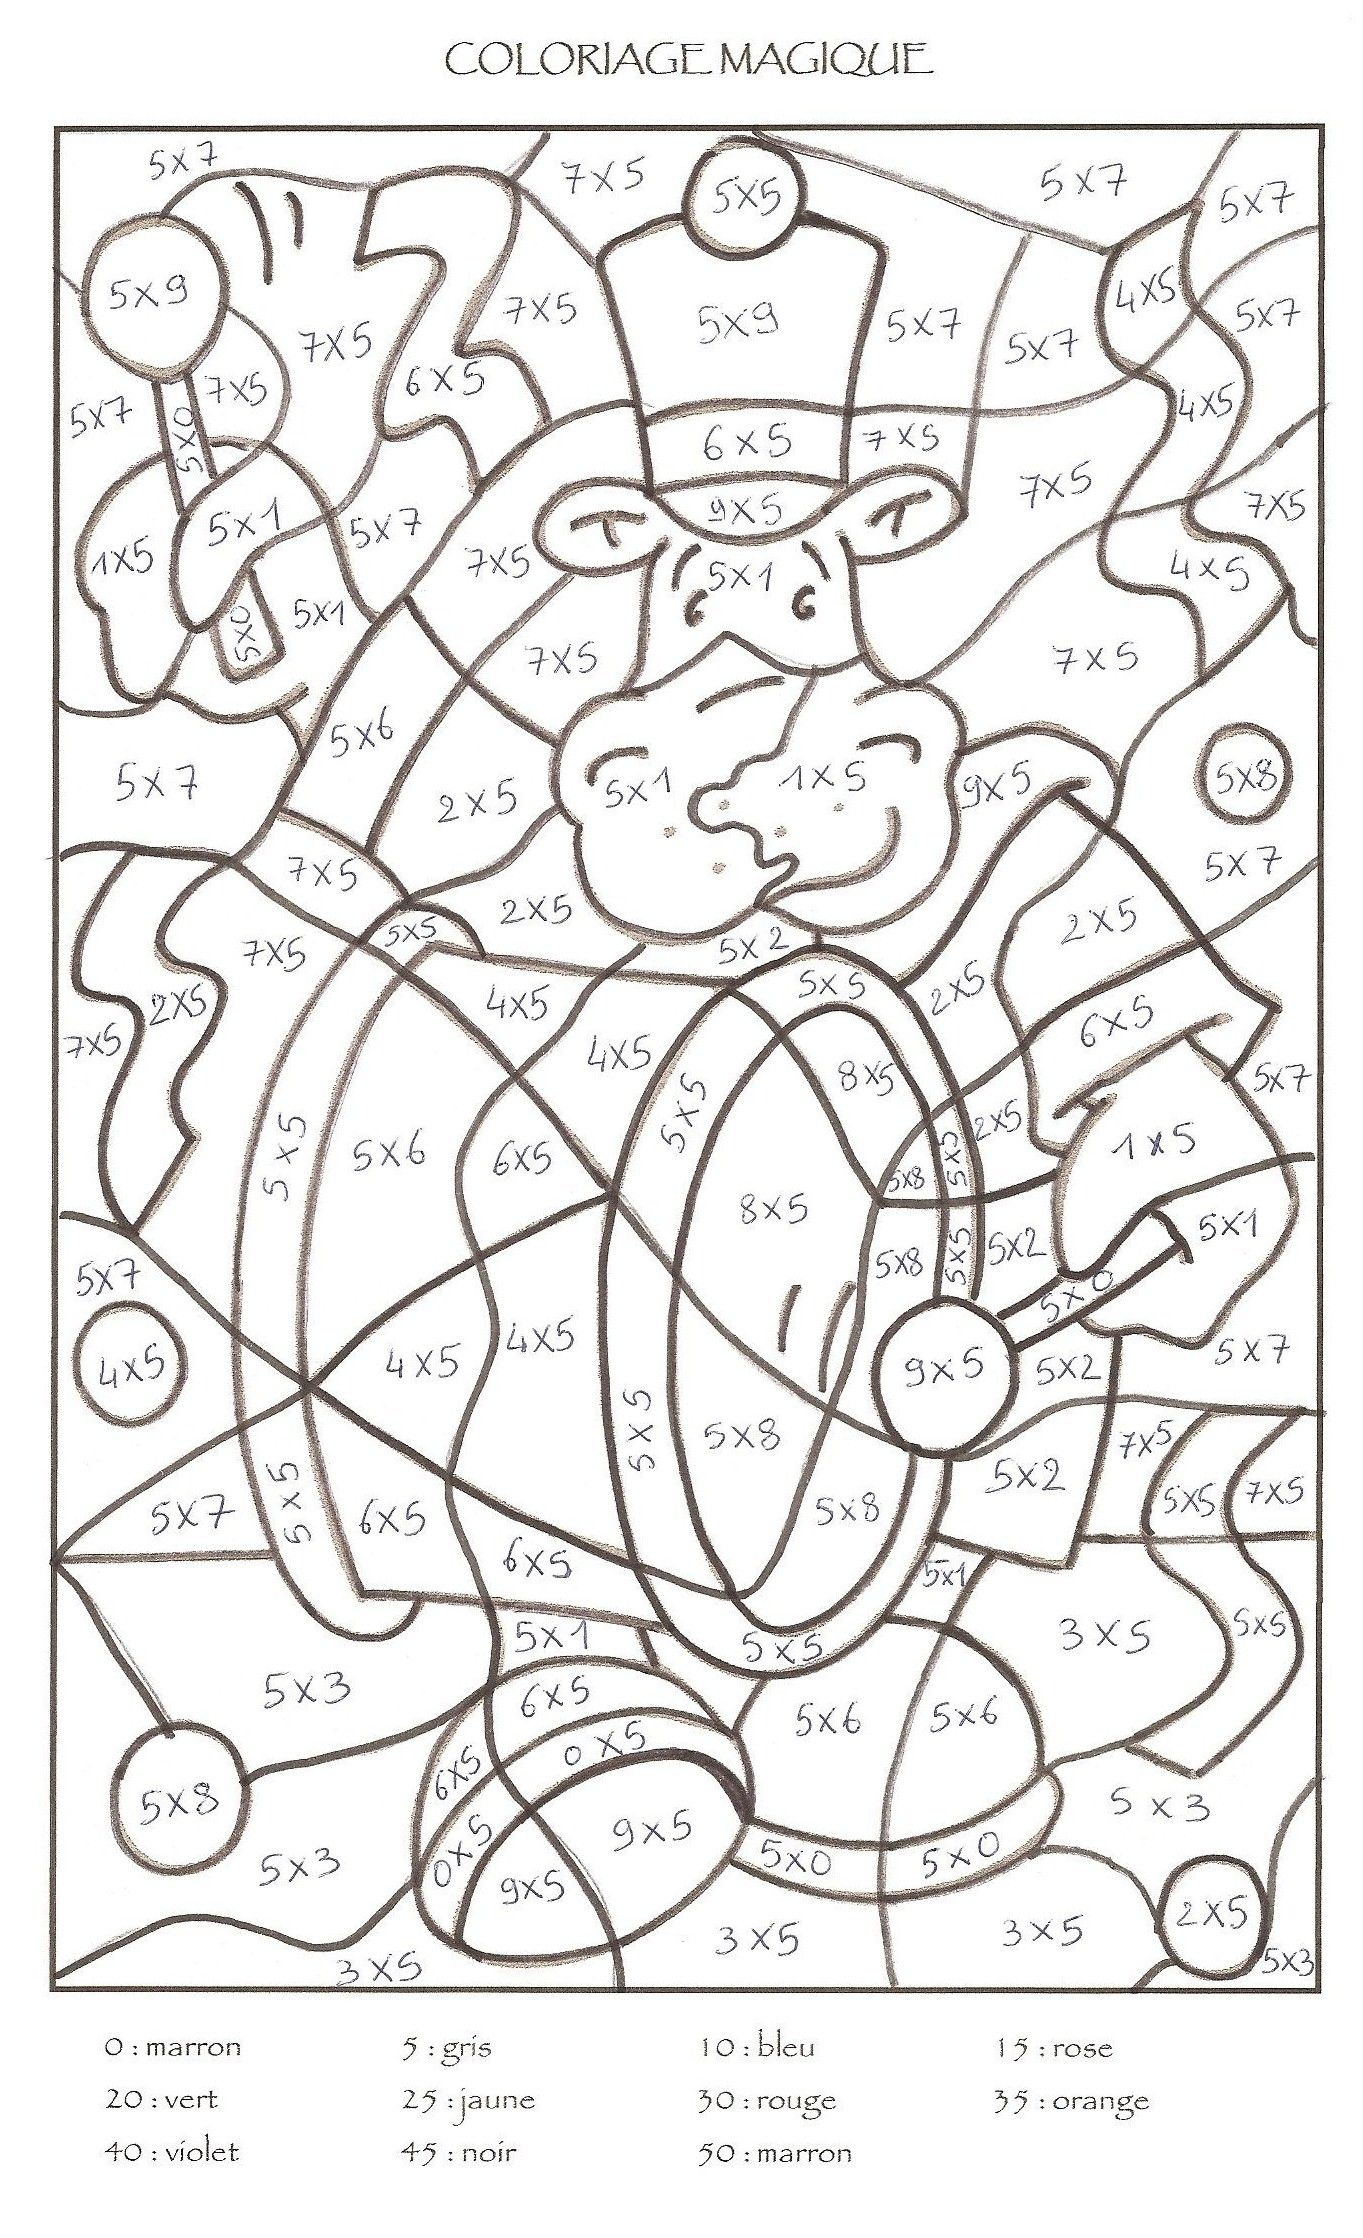 15 Aimable Coloriage Magique Multiplication Gallery encequiconcerne Dessin Magique Multiplication 